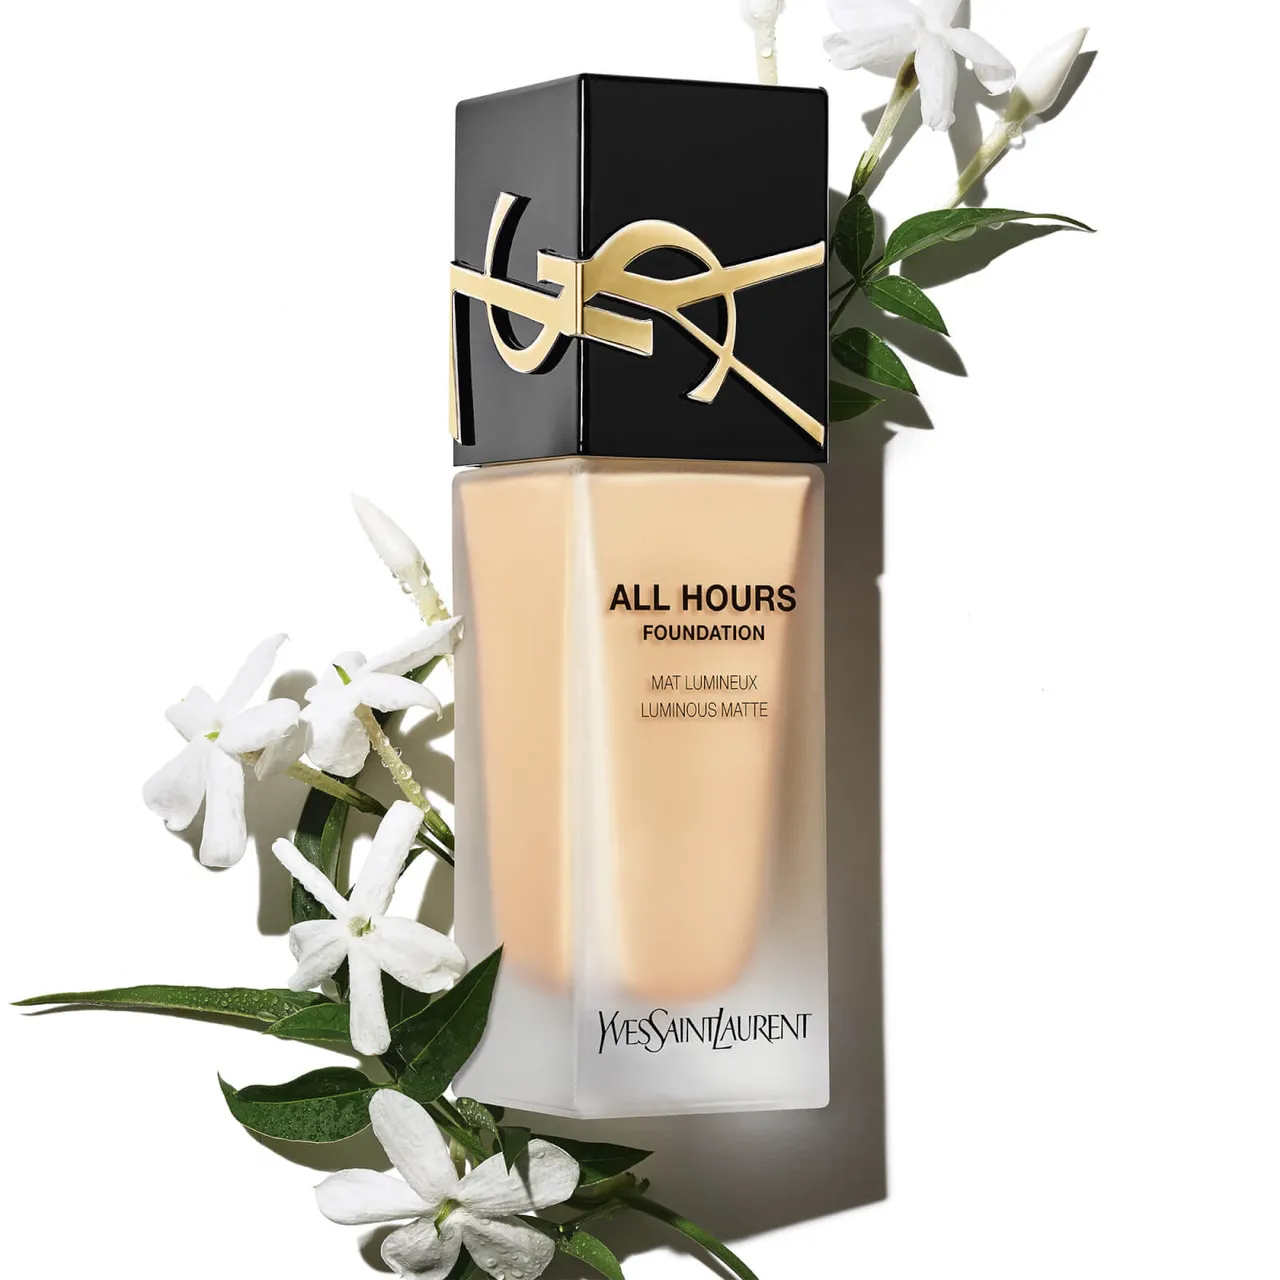 Yves Saint Laurent All Hours Luminous Matte Foundation with SPF 39 25ml (Various Shades) - LW9